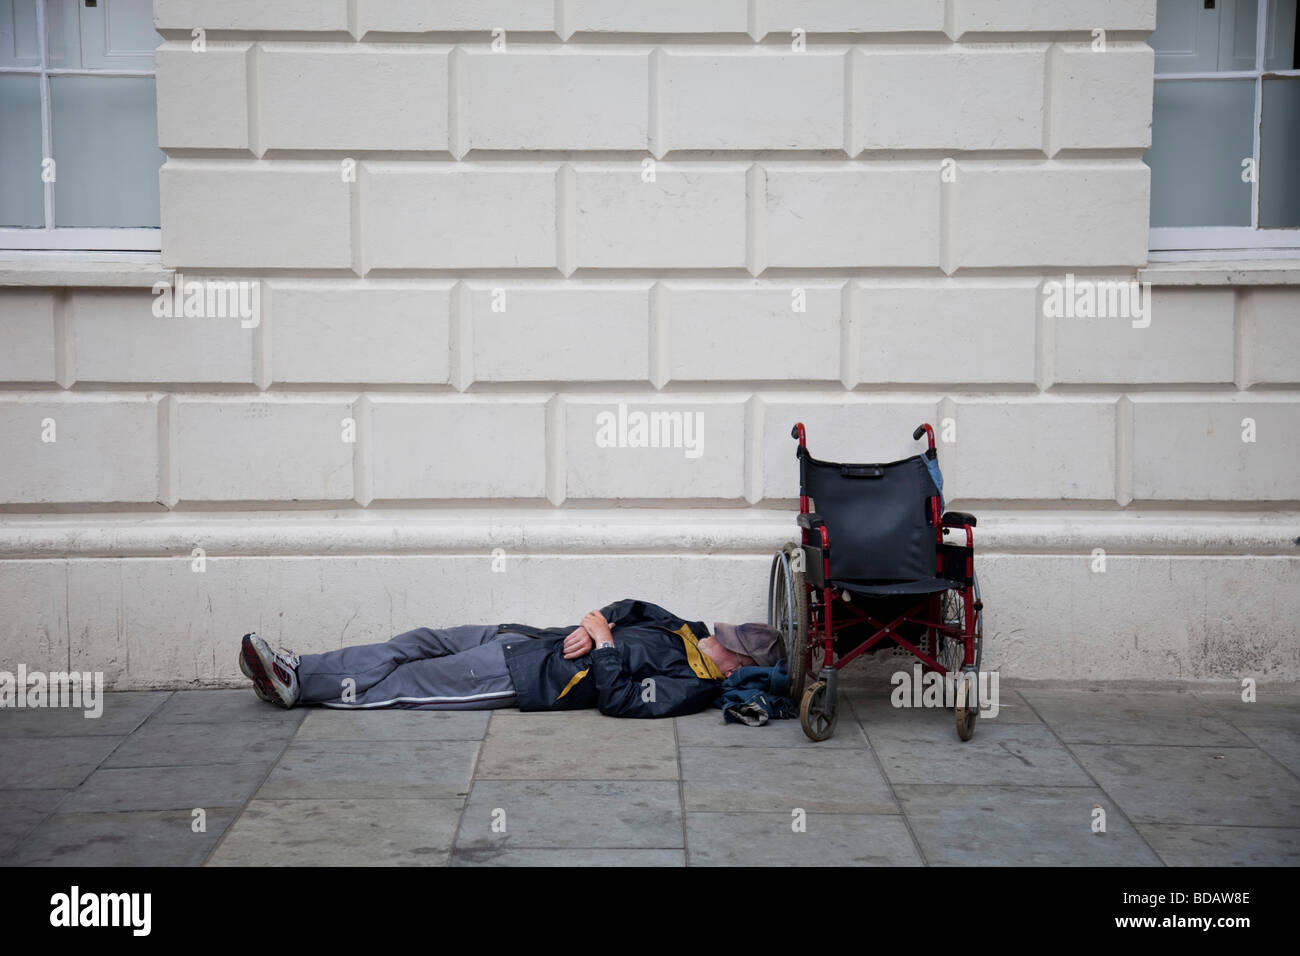 A homeless man lays next to his wheel chair sleeping perhaps passed out on the pavement, London Stock Photo